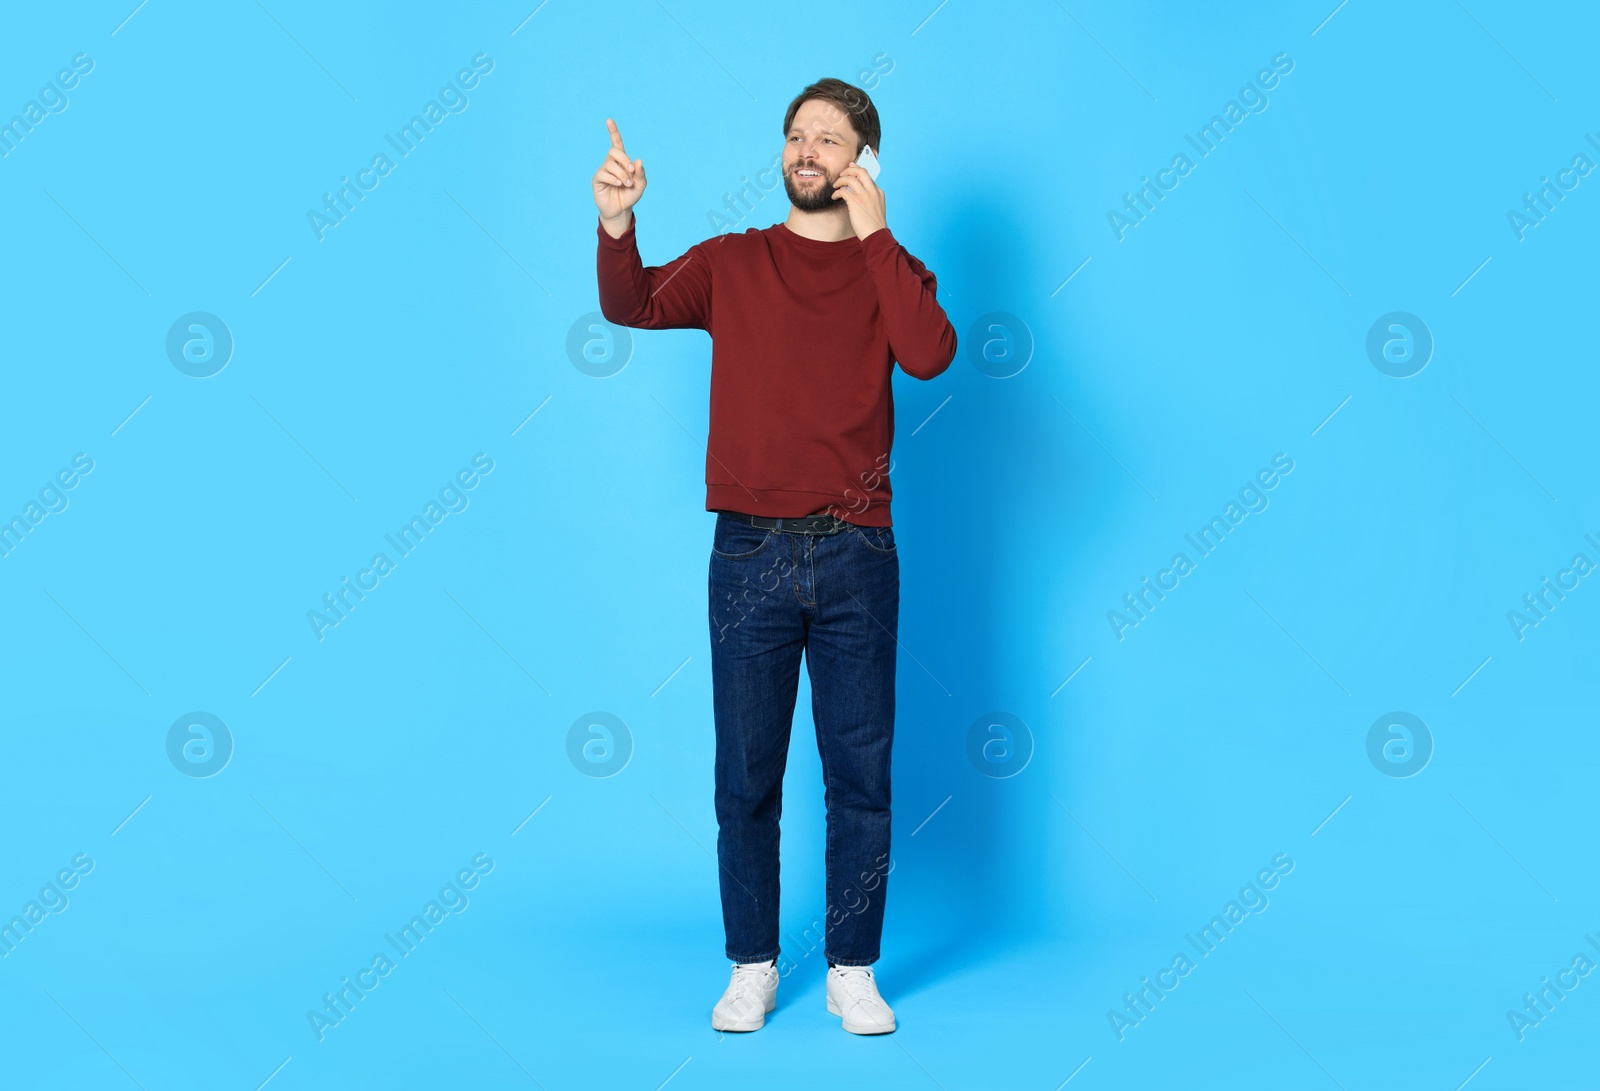 Photo of Man talking on smartphone against light blue background